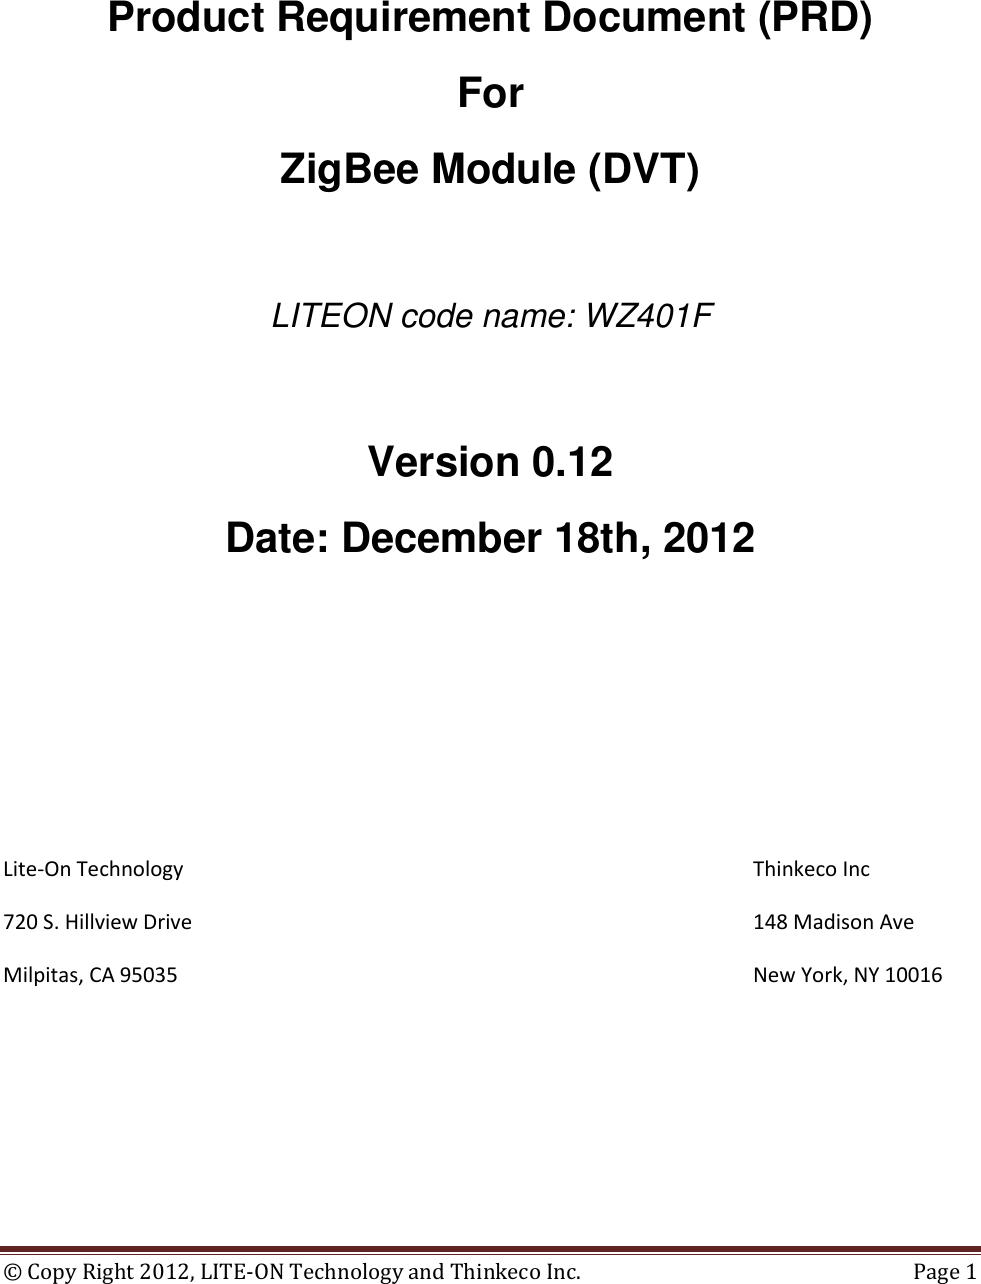 ©  Copy Right 2012, LITE-ON Technology and Thinkeco Inc.  Page 1    Product Requirement Document (PRD) For ZigBee Module (DVT)   LITEON code name: WZ401F  Version 0.12 Date: December 18th, 2012      Lite-On Technology                Thinkeco Inc 720 S. Hillview Drive                148 Madison Ave   Milpitas, CA 95035                New York, NY 10016 